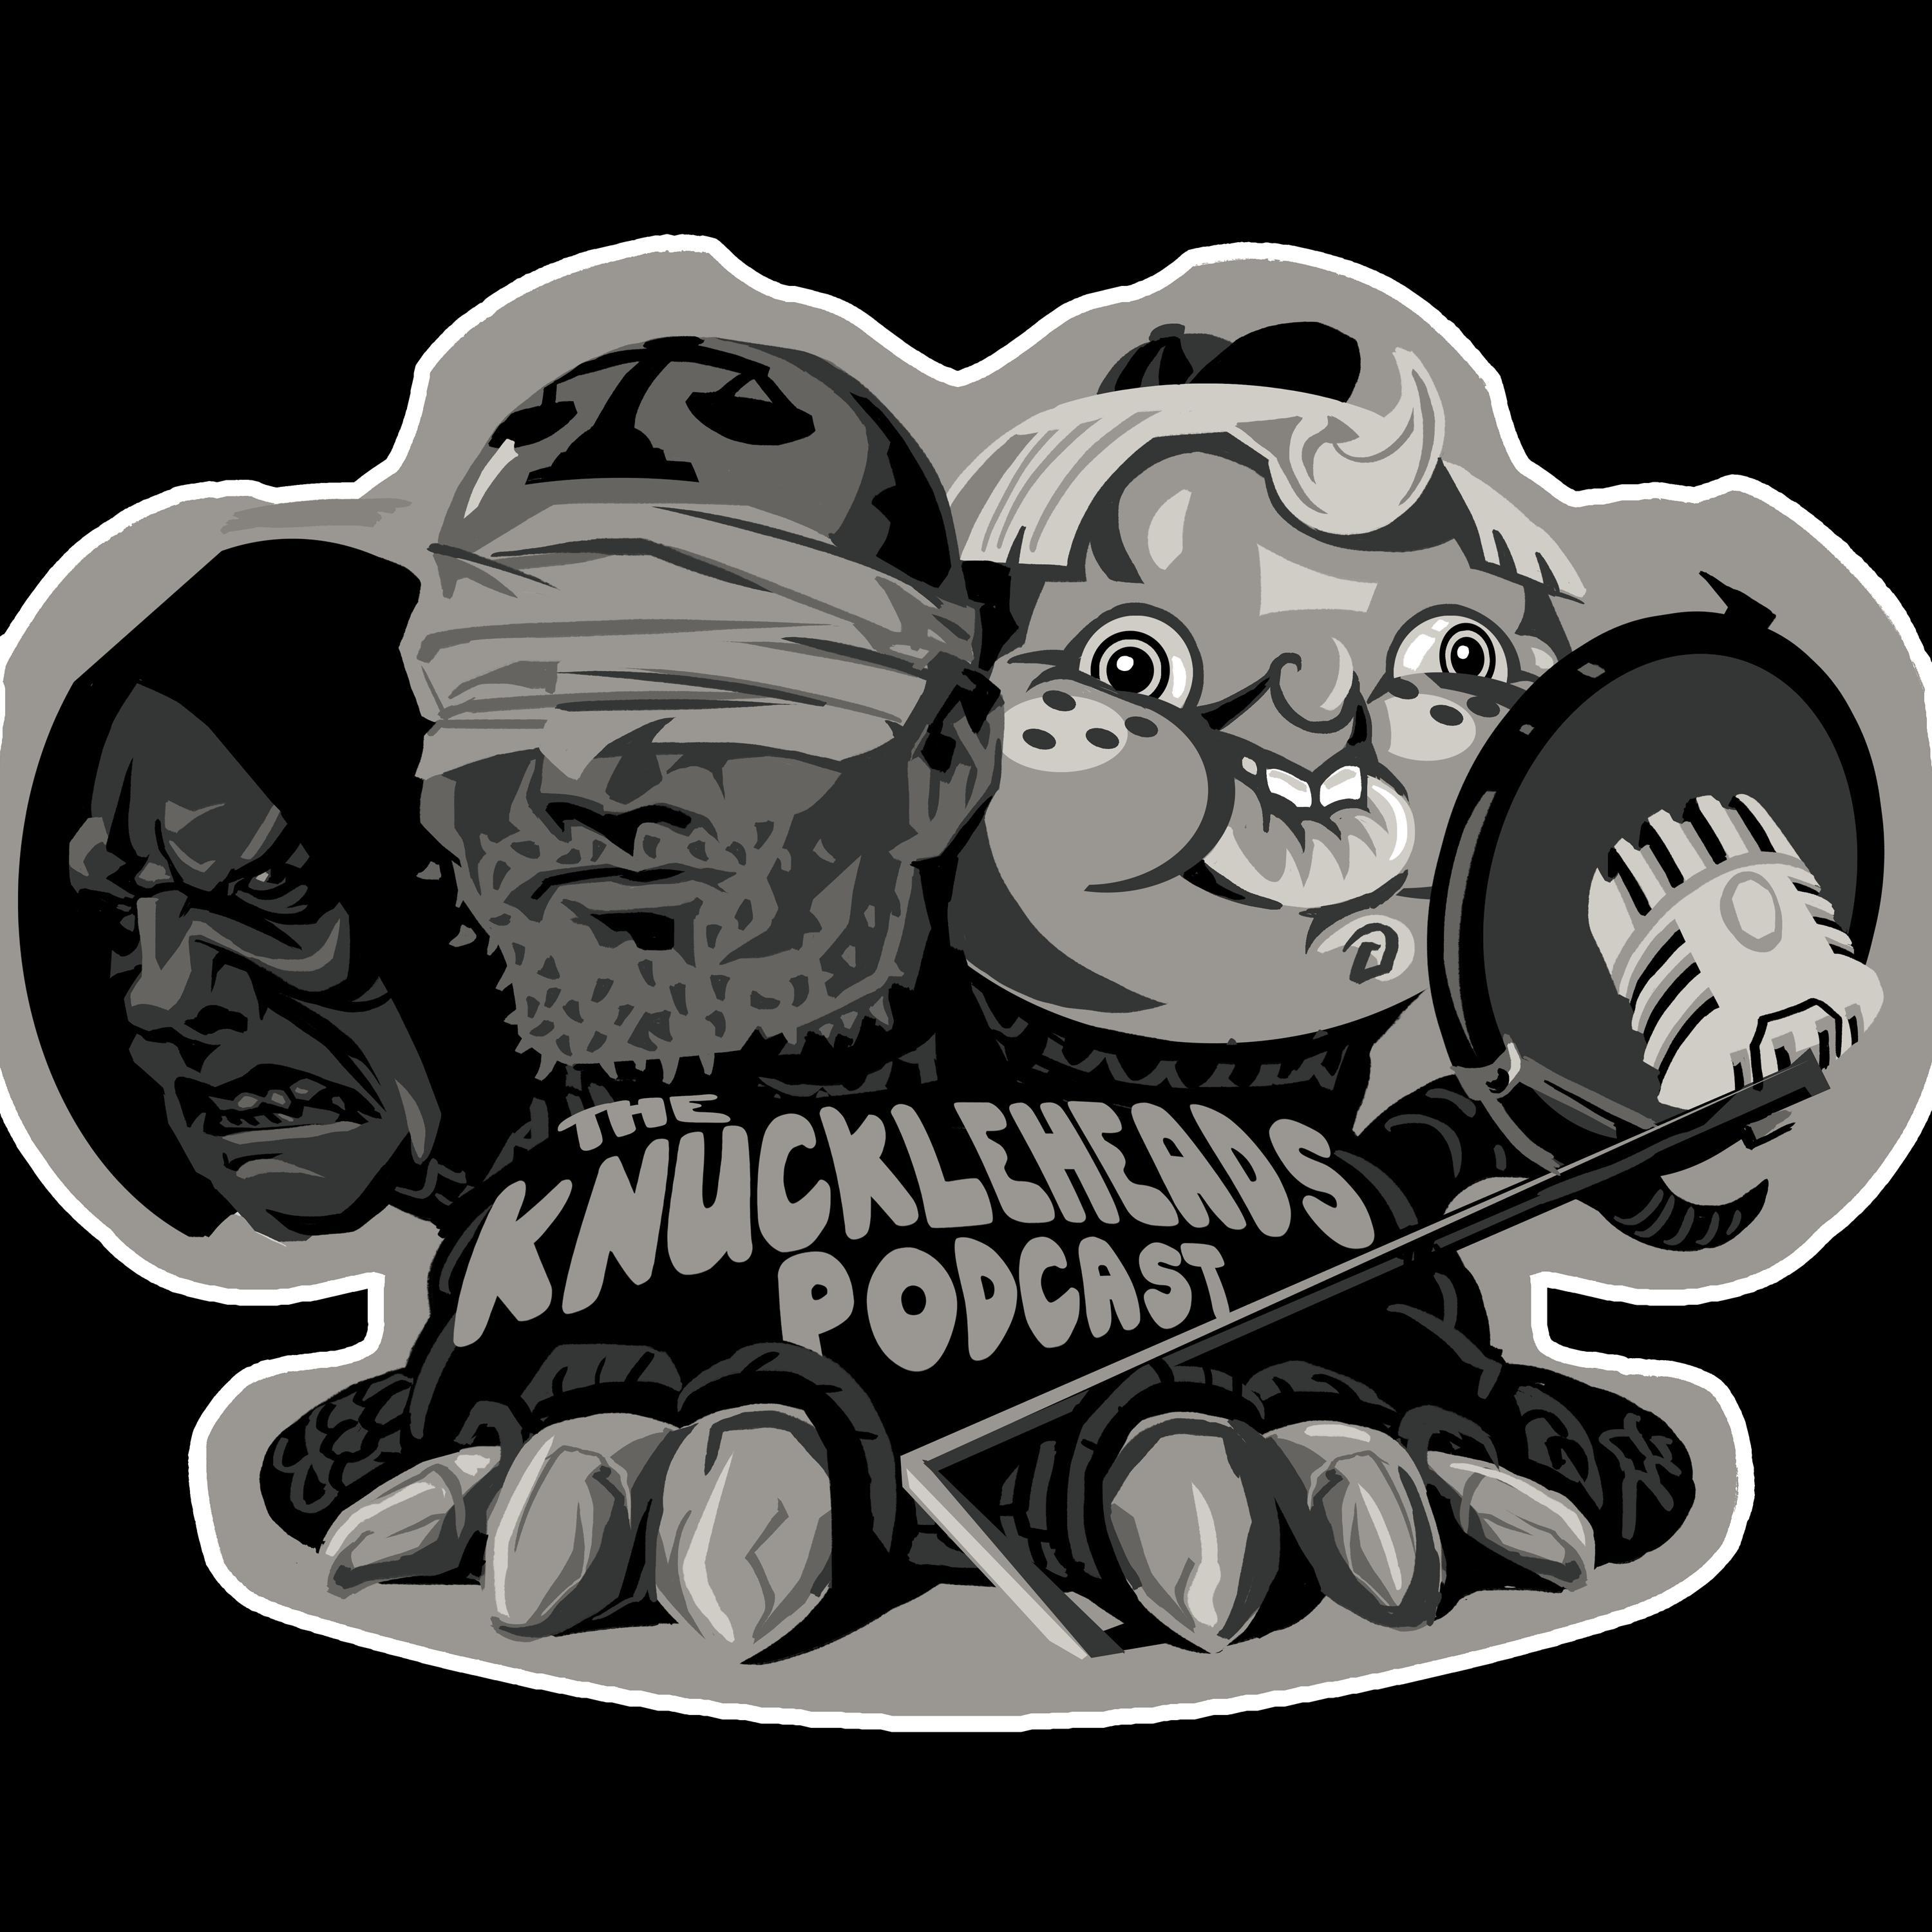 OG knuckleheadspodcast is the best podcast you never heard of. Topics are movies,tv, comics and games we review and talk about everything welcome to the convo!